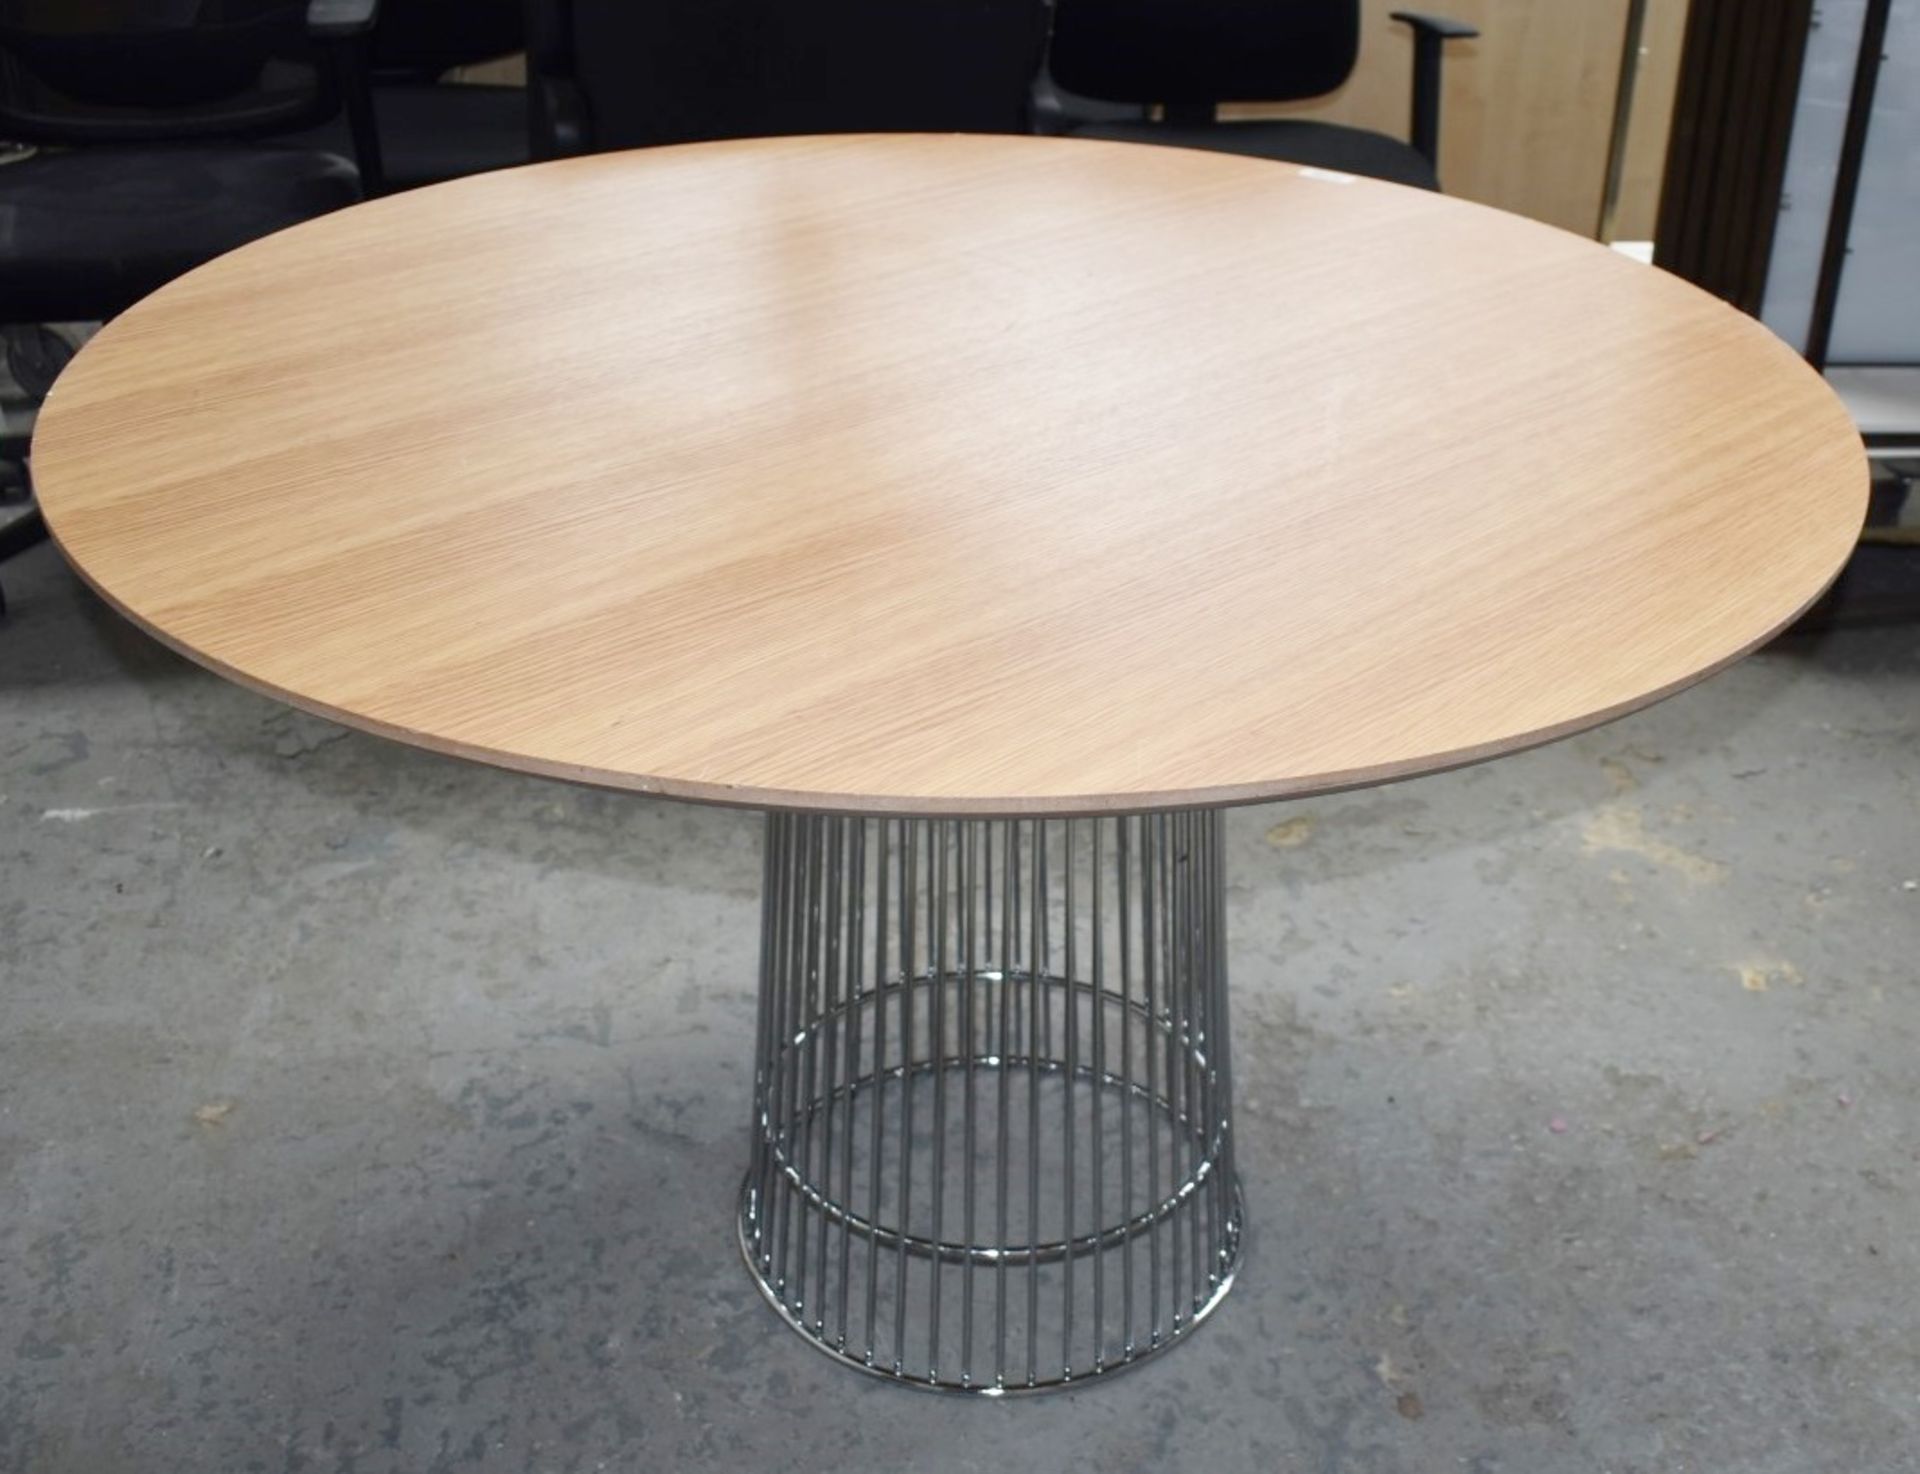 1 x Temahome Dining Table With a Large Round Table Top and Stylish Chrome Base - 150cm Diameter - Image 11 of 13